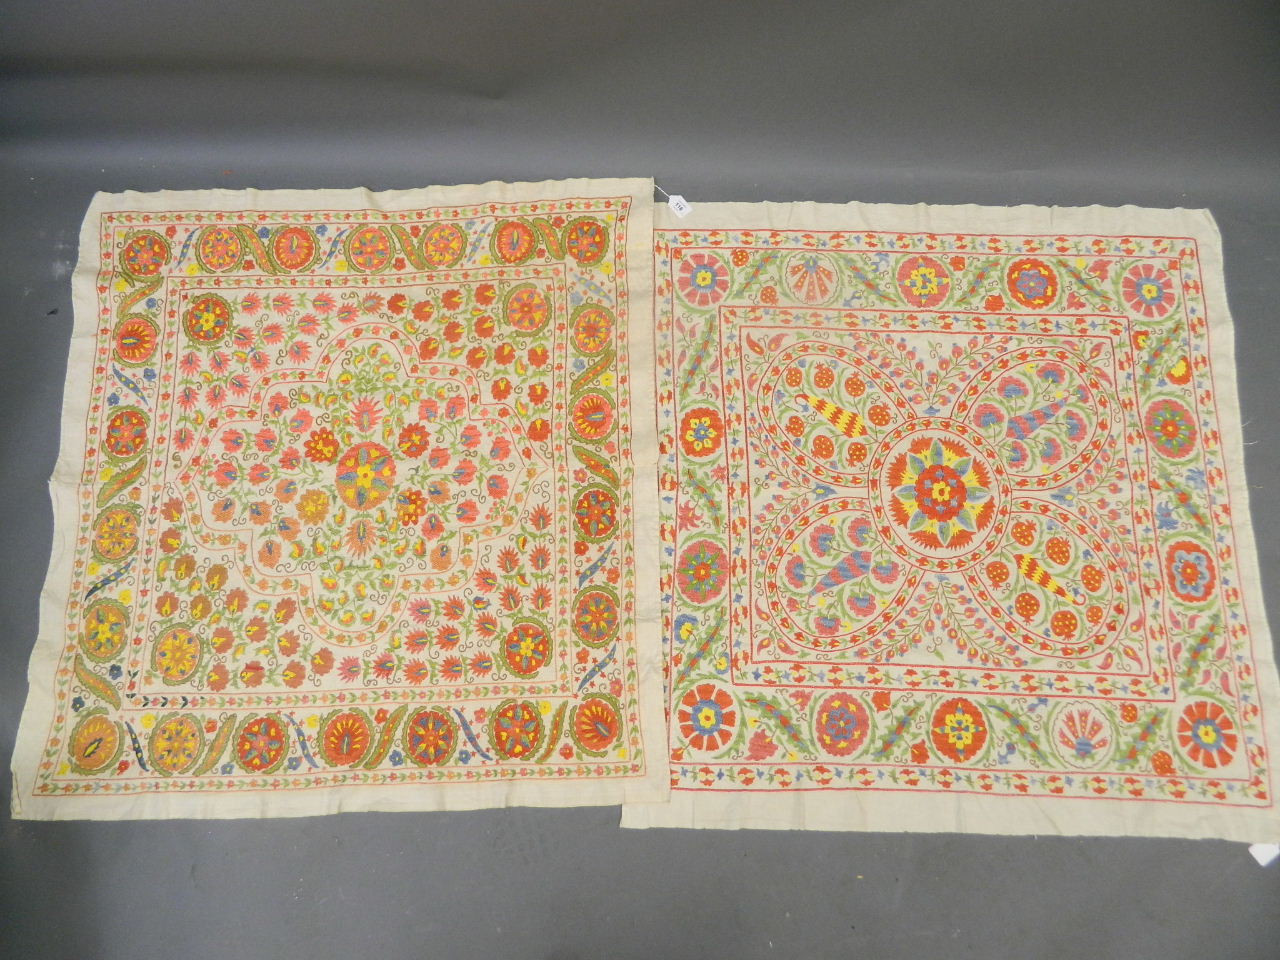 A pair of Central Asian silk embroidered Suzani Bukhara wall hangings, 40" square